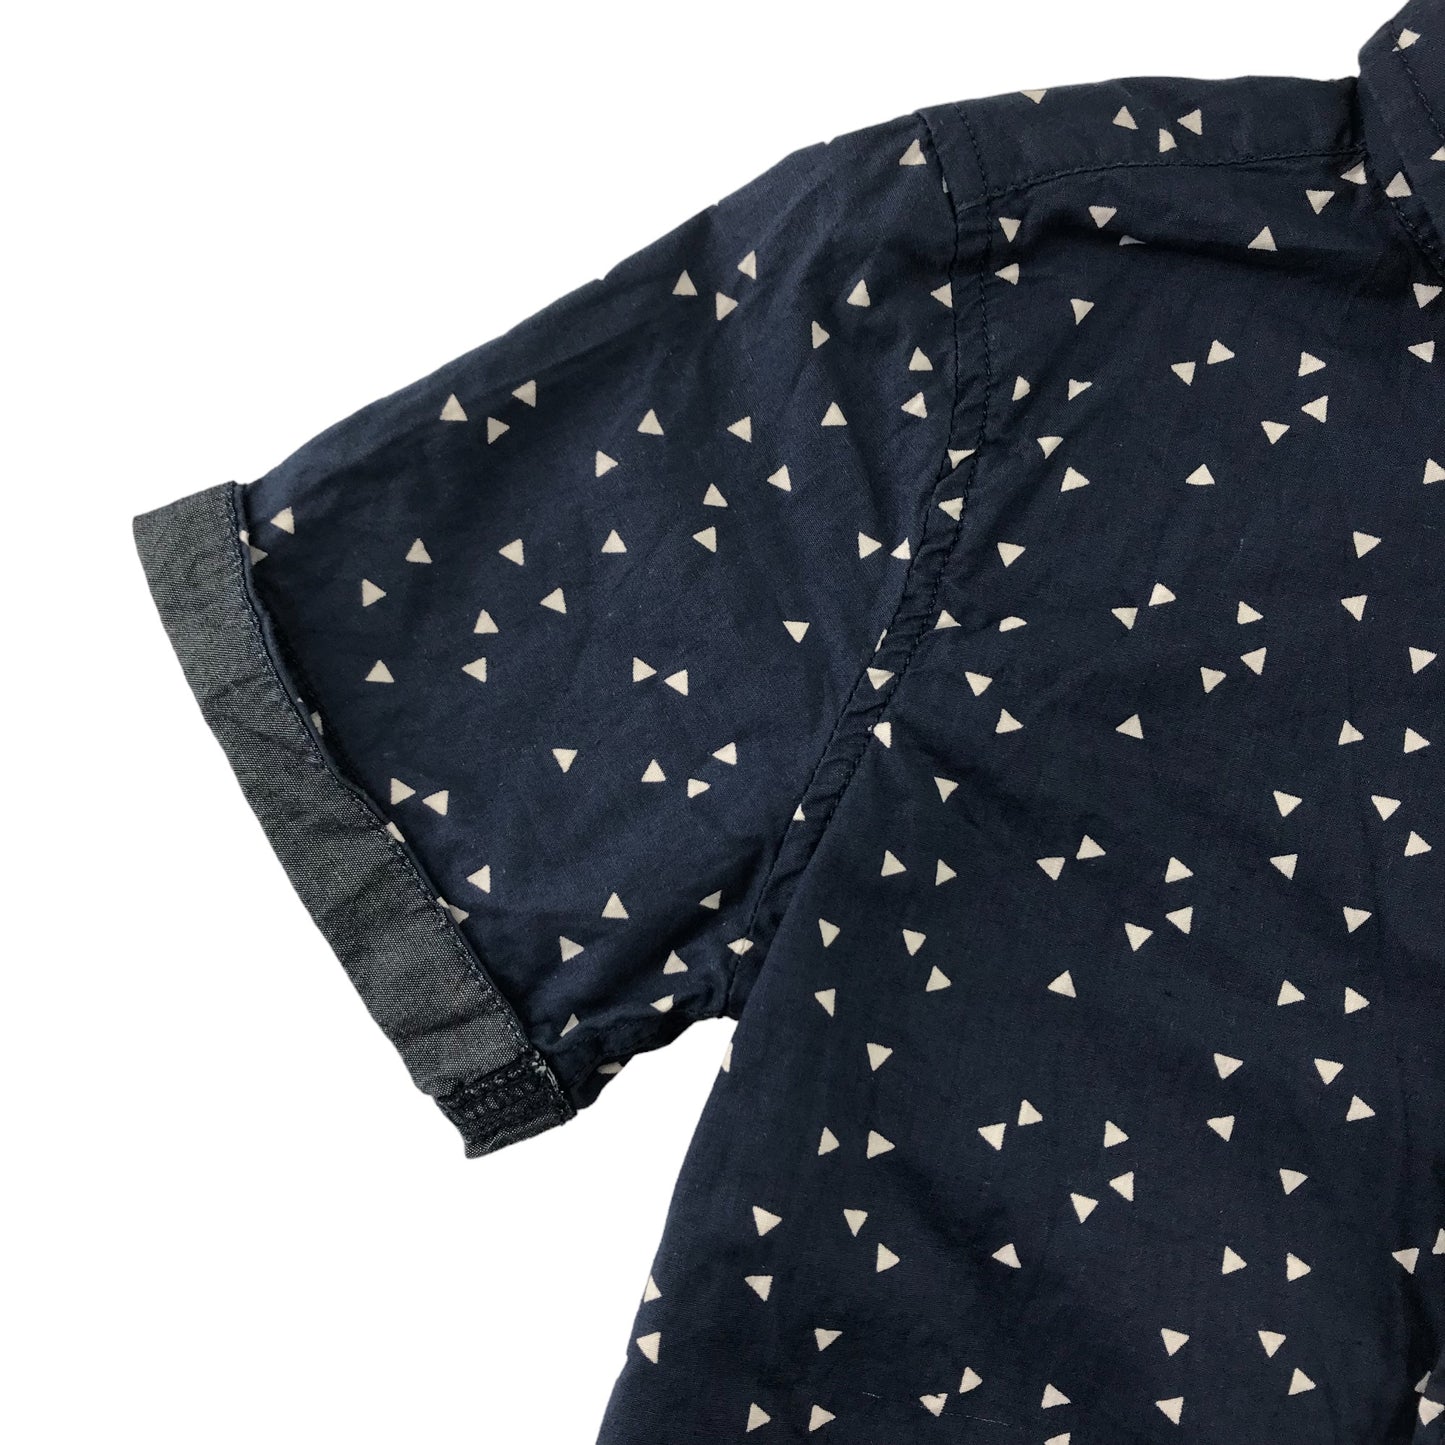 Tu Shirt Age 8 Navy with Triangle Pattern Short Sleeve Button Up Cotton